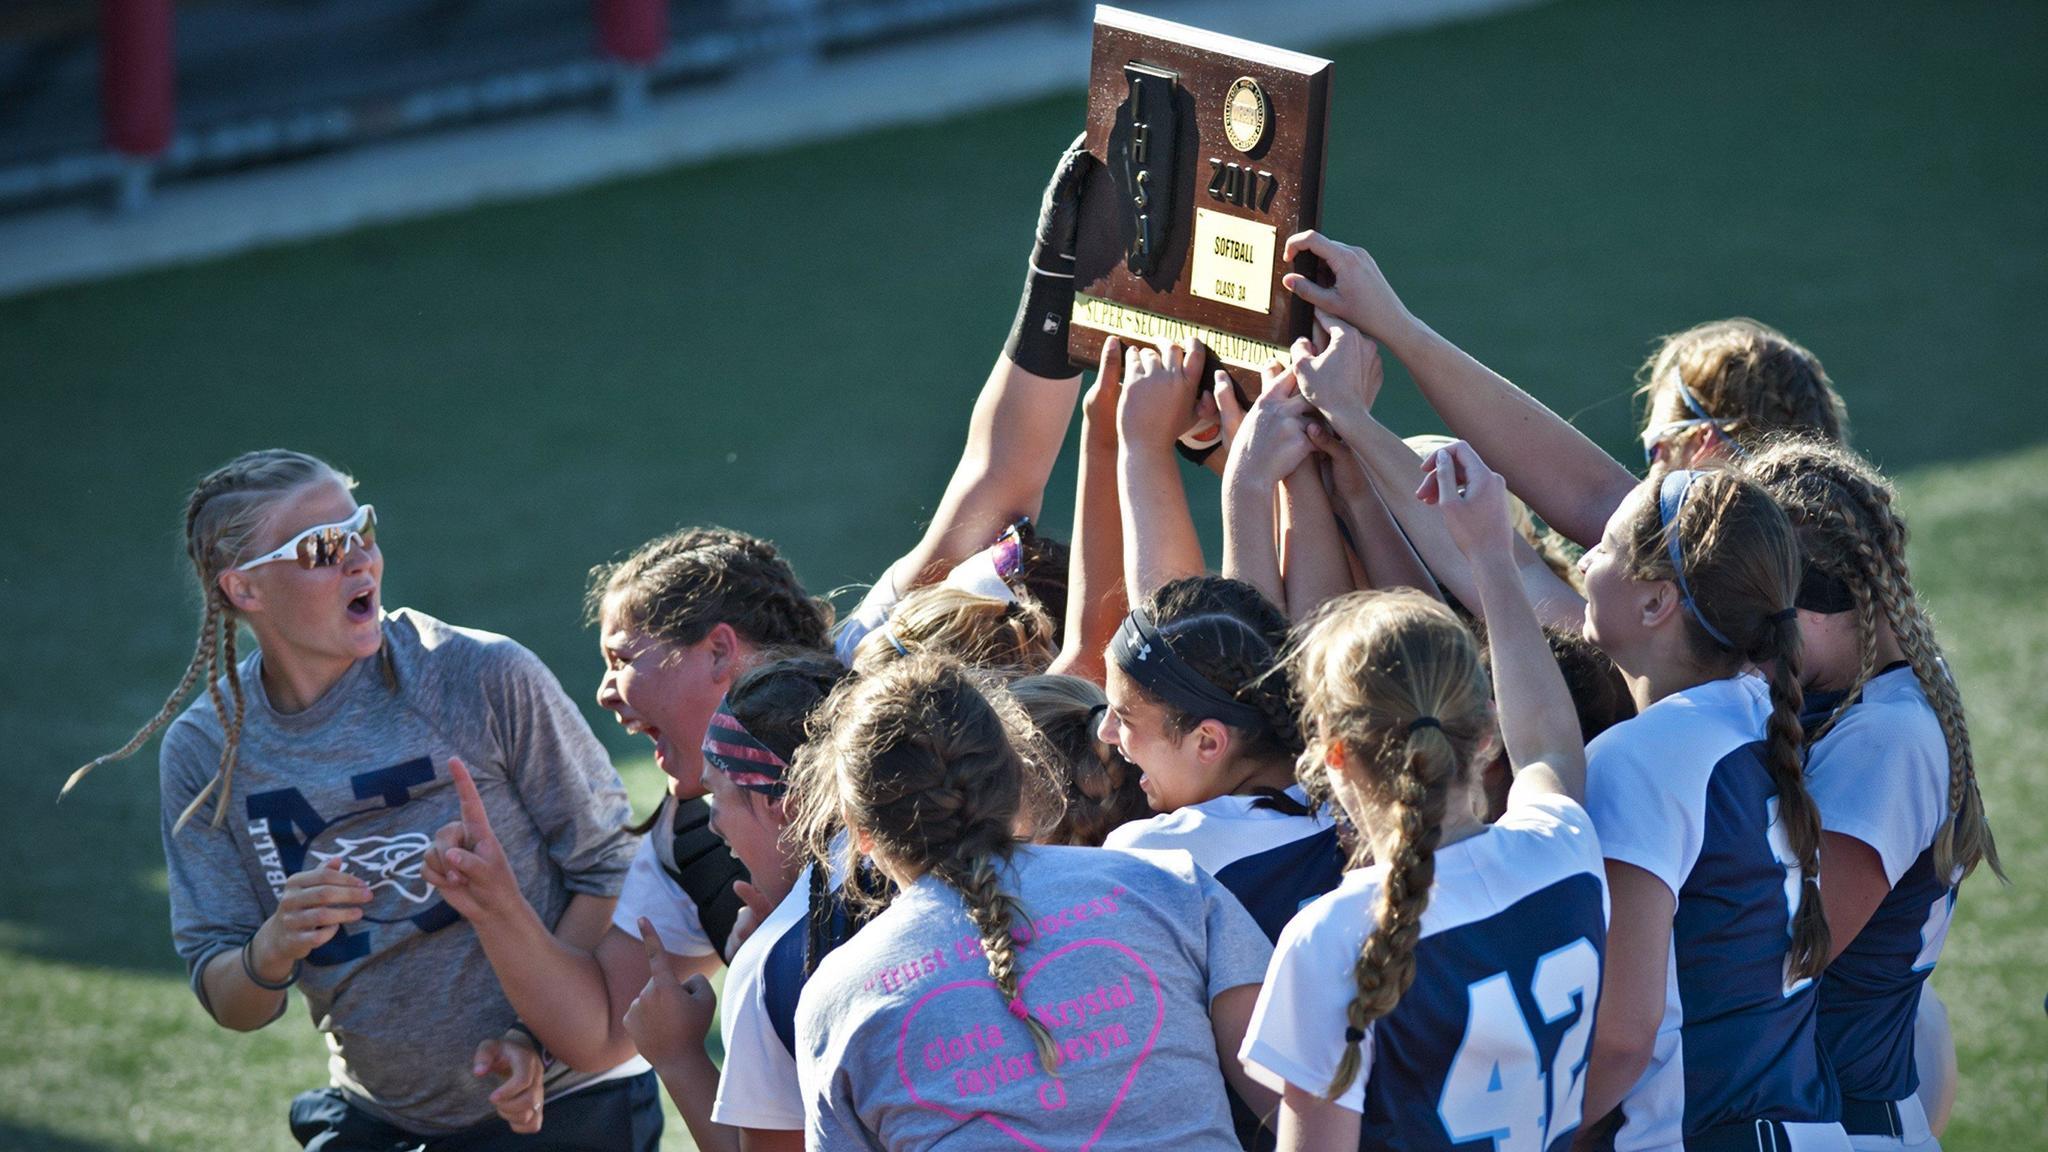 Nazareth shuts out Montini to reach first softball state semifinal - Chicago Tribune